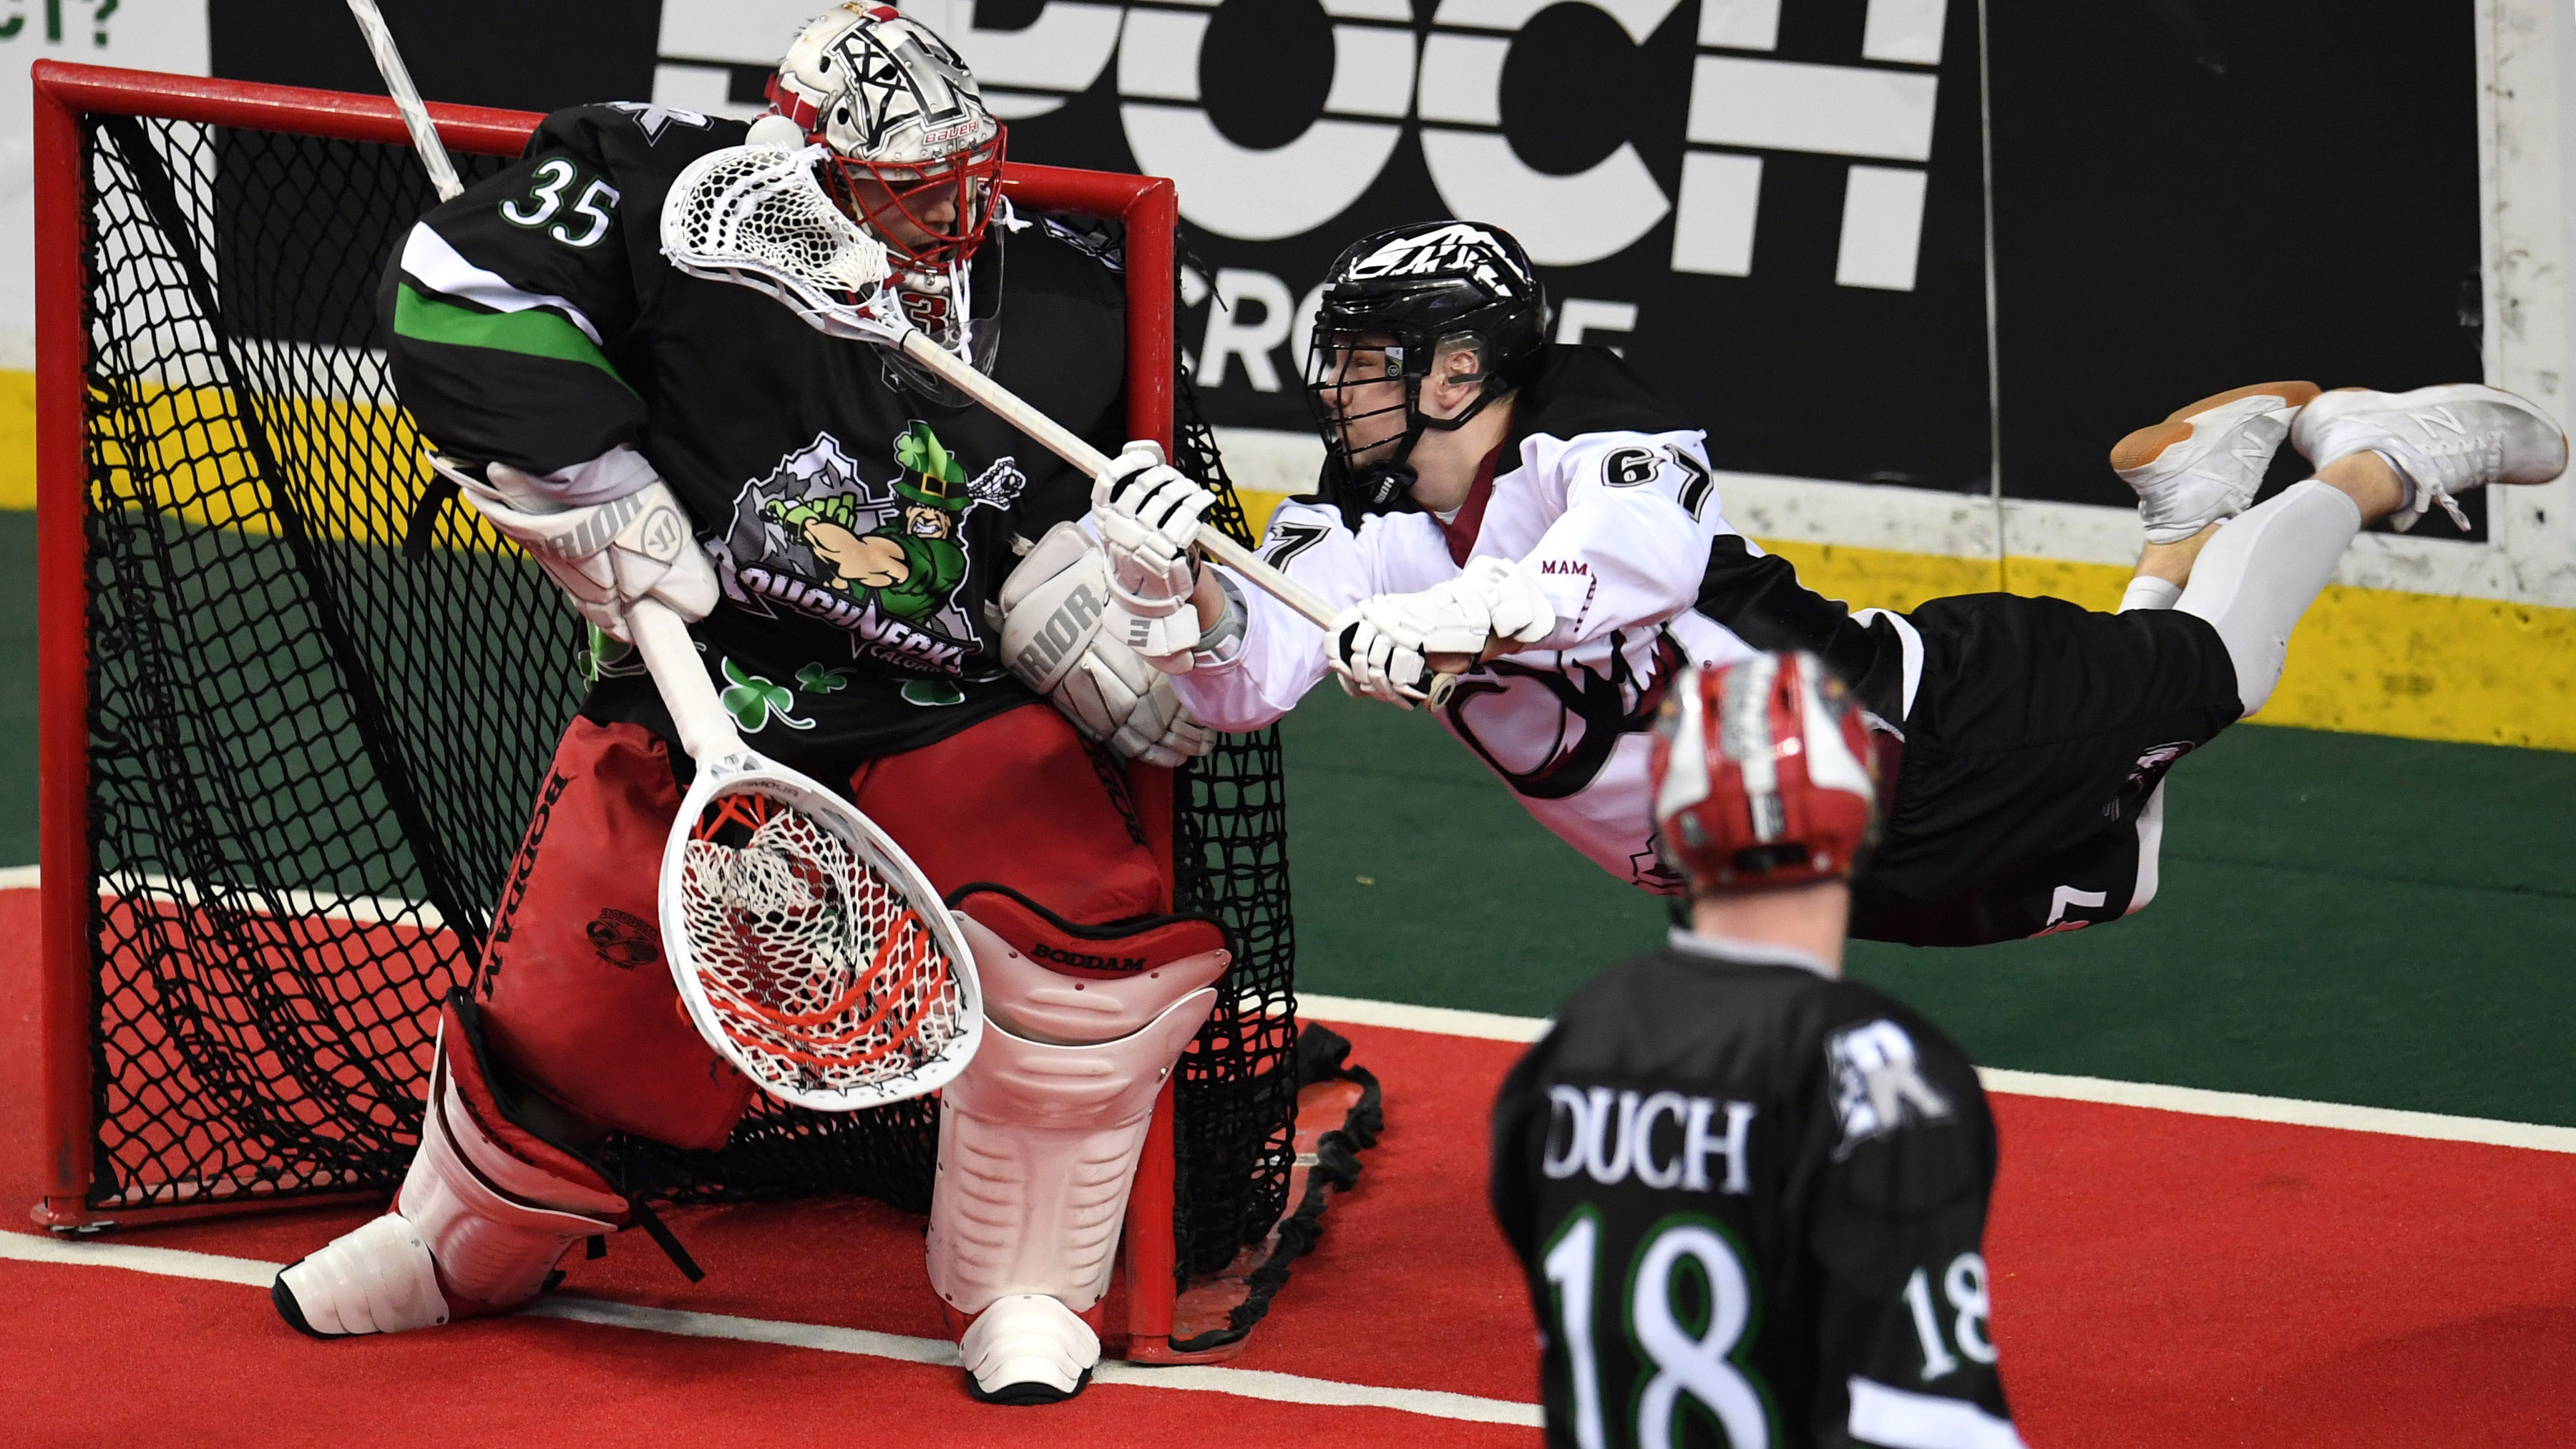 Adorned in shamrocks for St. Patrick’s Day, the Roughnecks couldn’t overcom...